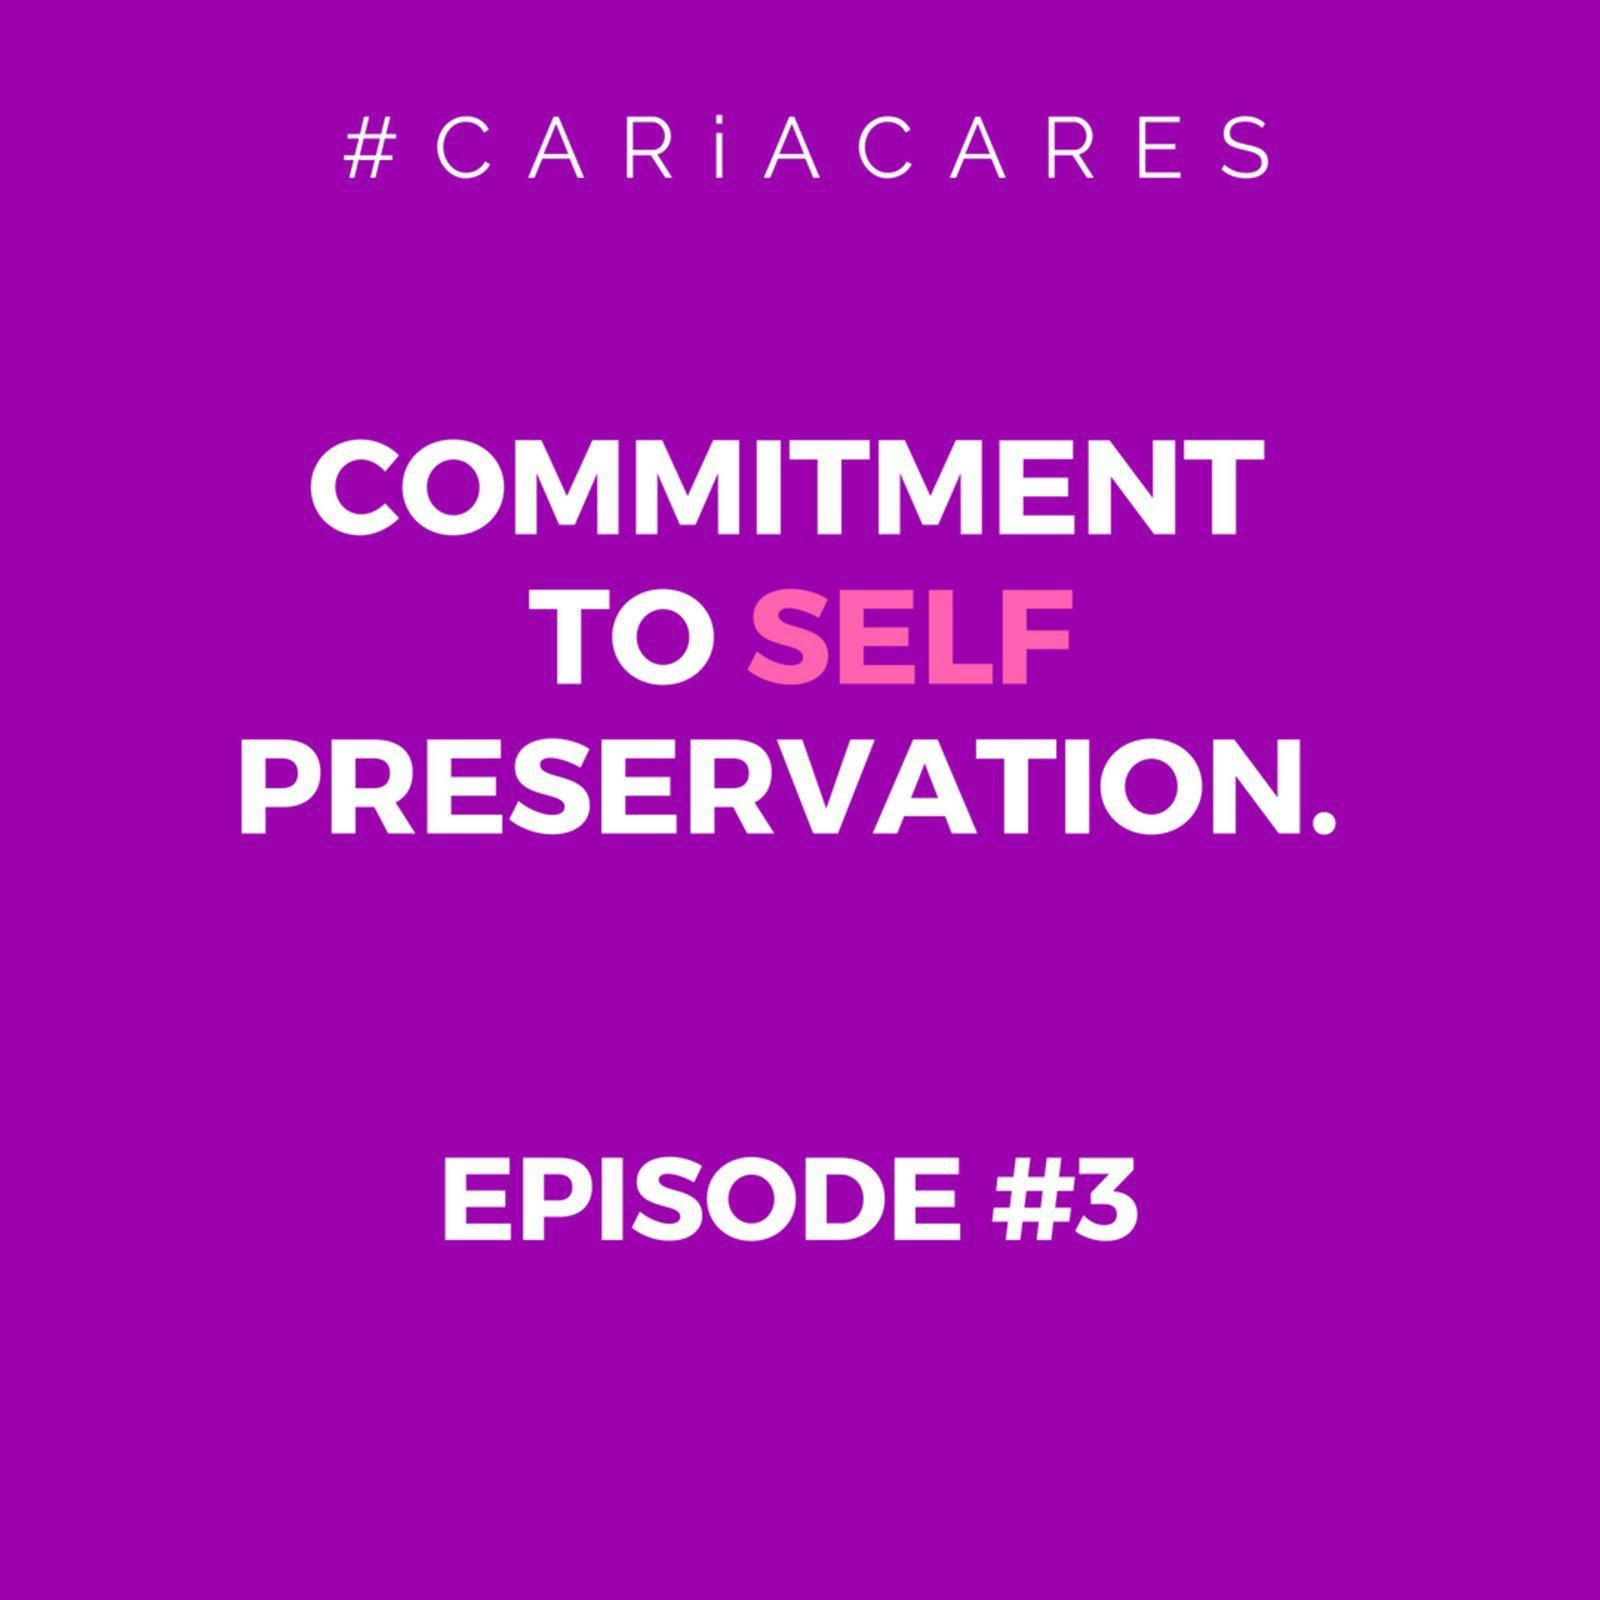 Commitment to self preservation